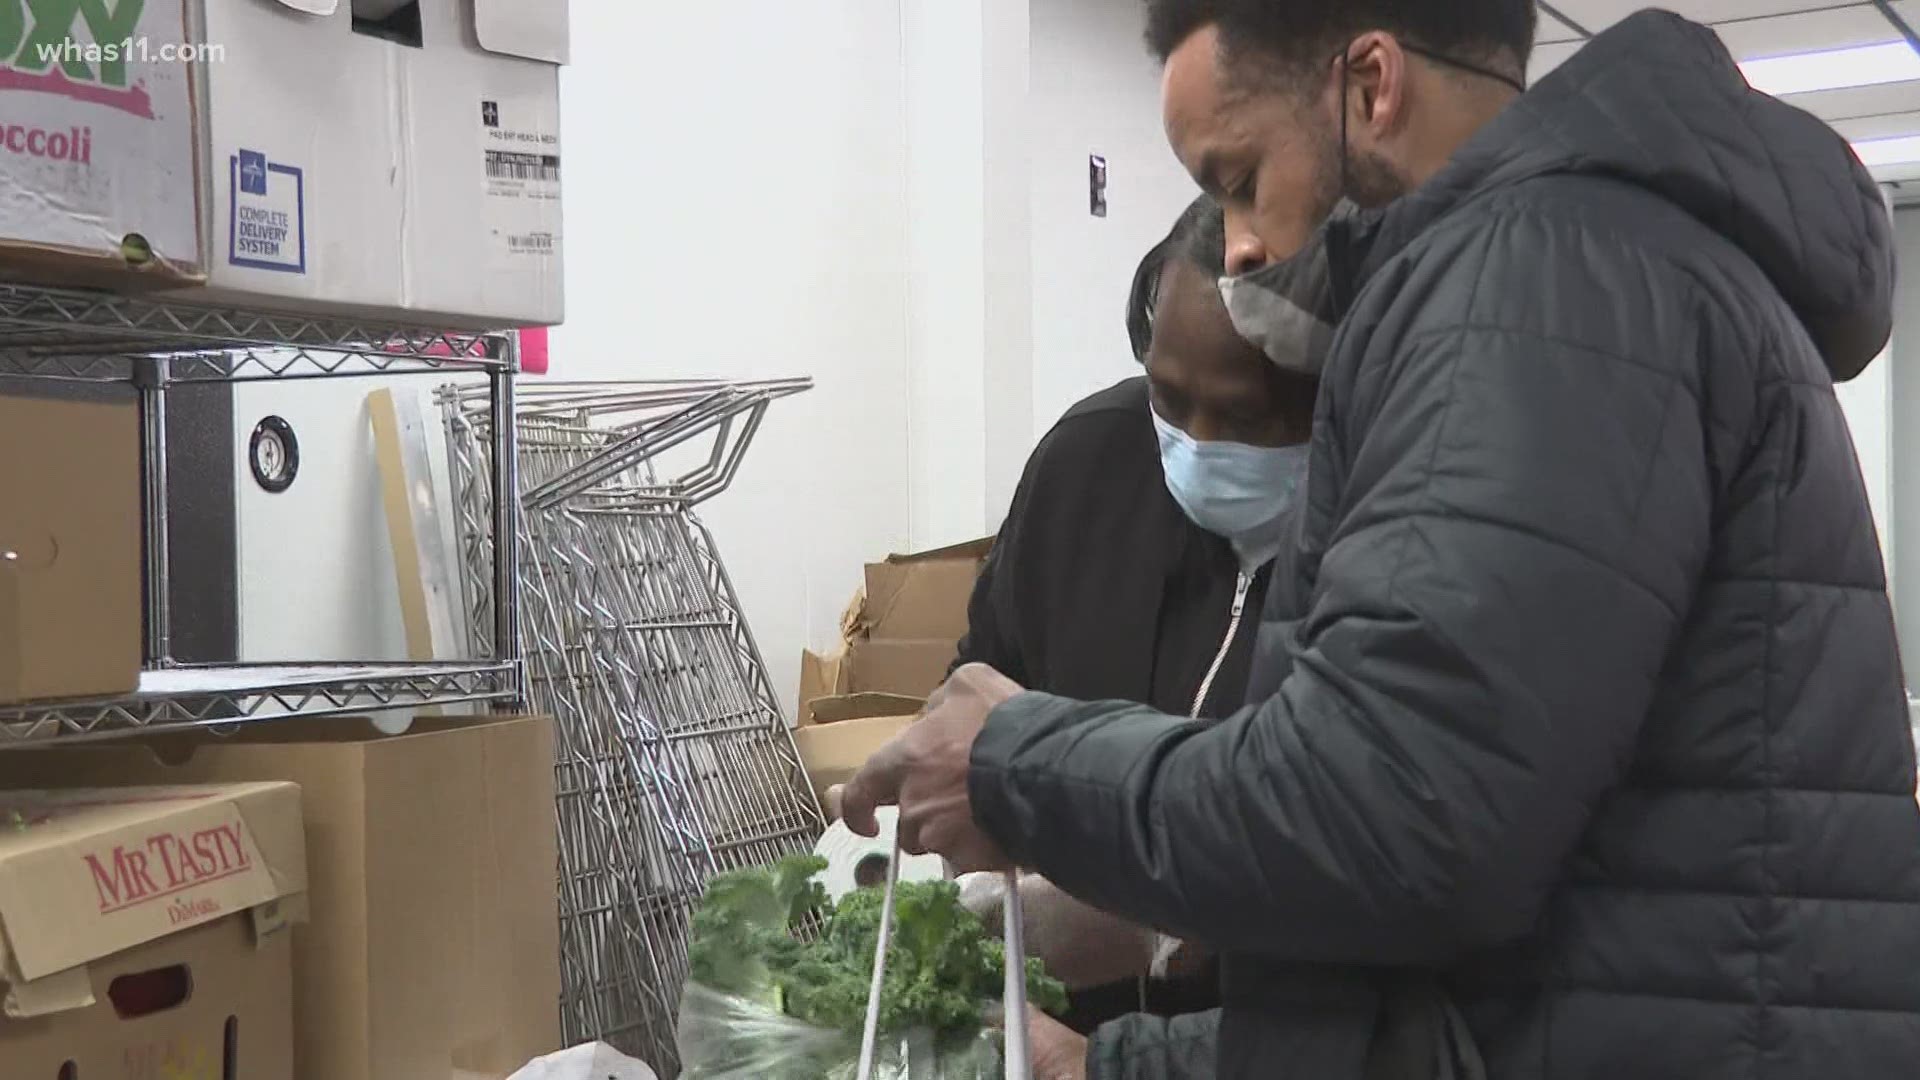 The new Black-owned market will offer fresh fruits, vegetables and other necessities to an area designated as a food desert.